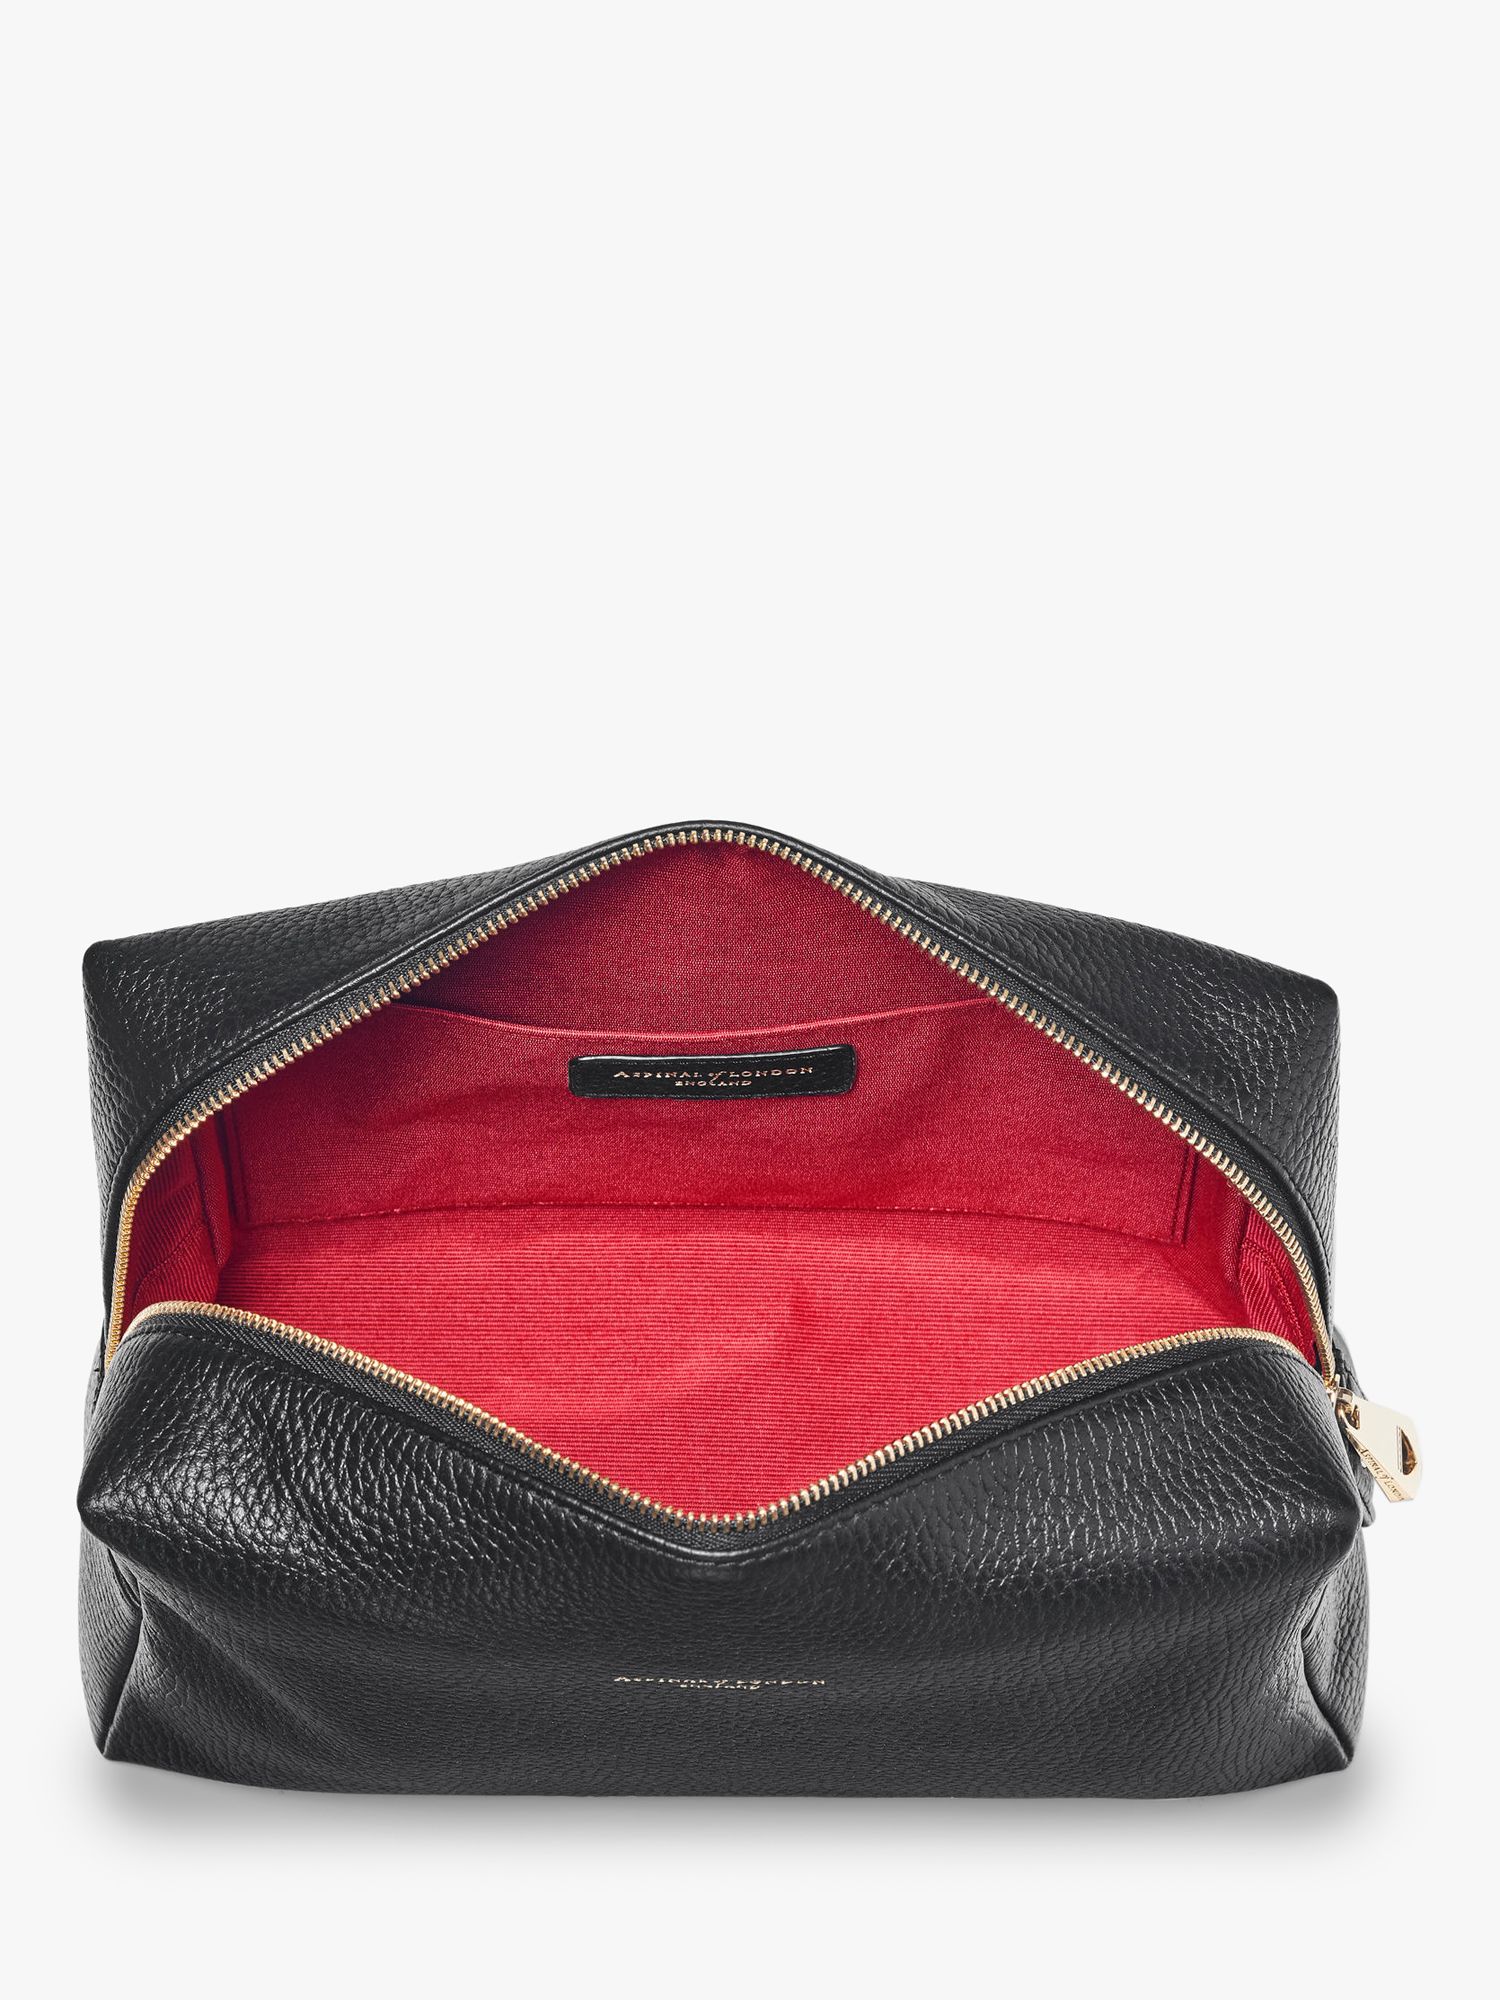 Aspinal of London Large Pebble Leather Toiletry Bag, Black